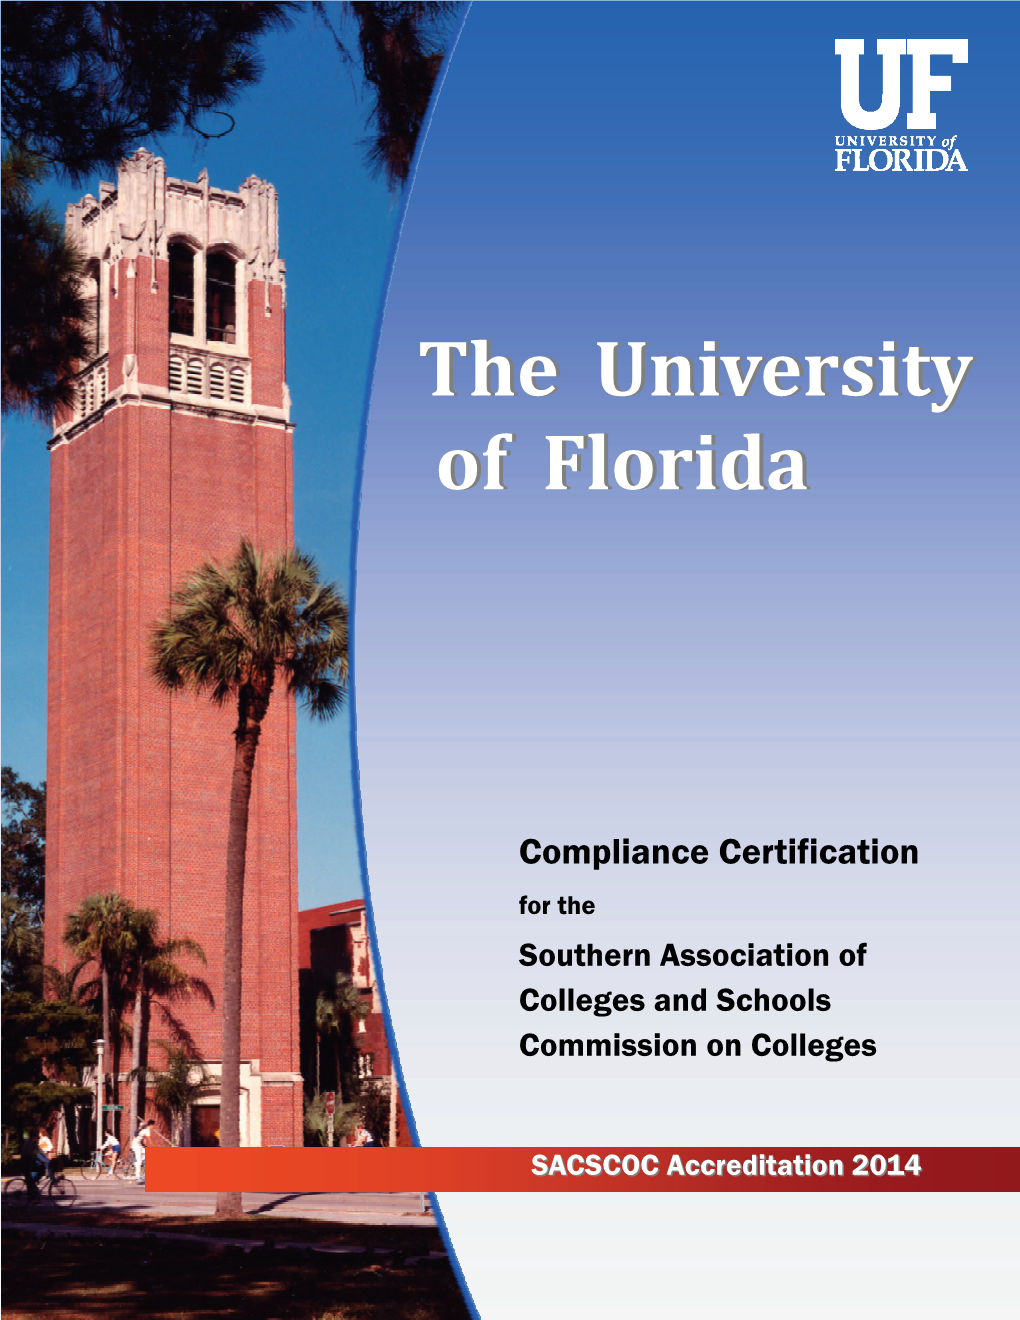 UF Compliance Certification 2013